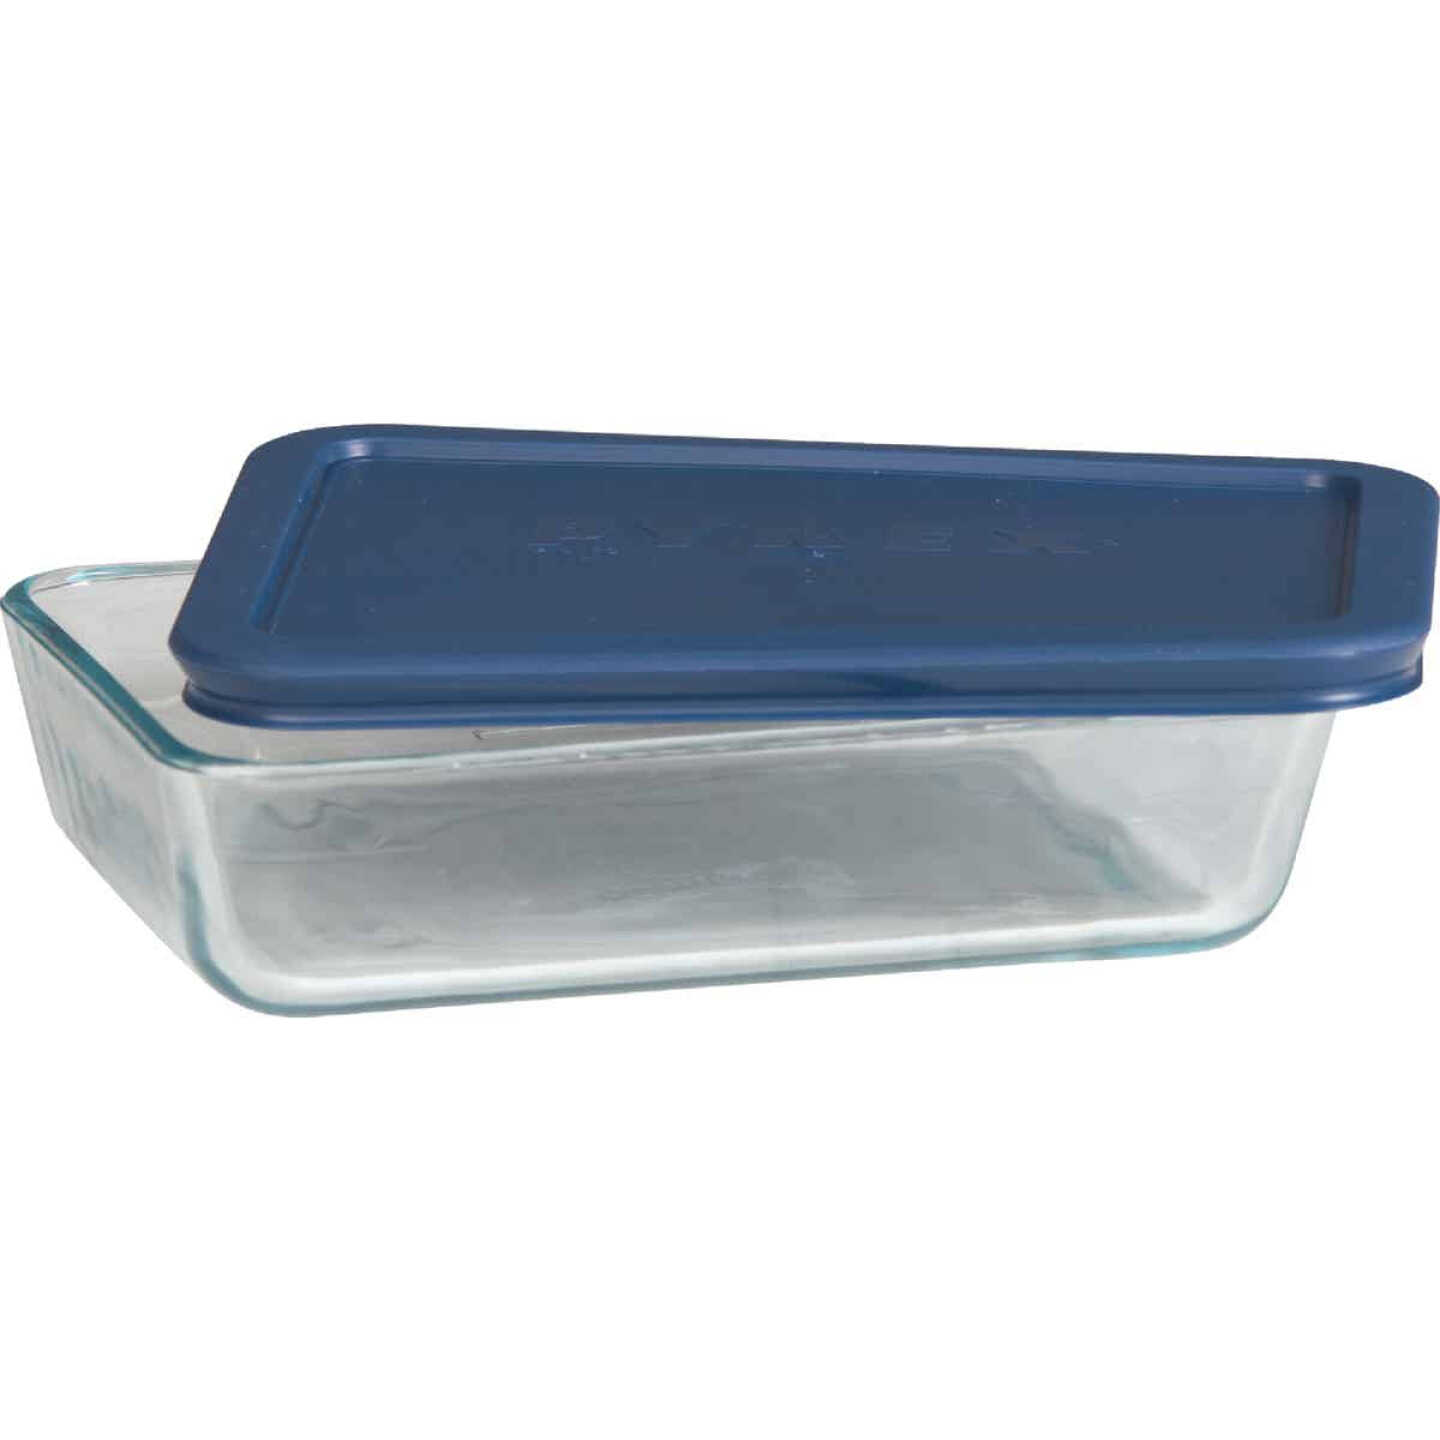  Pyrex Simply Store Glass Food Storage Container, Snug